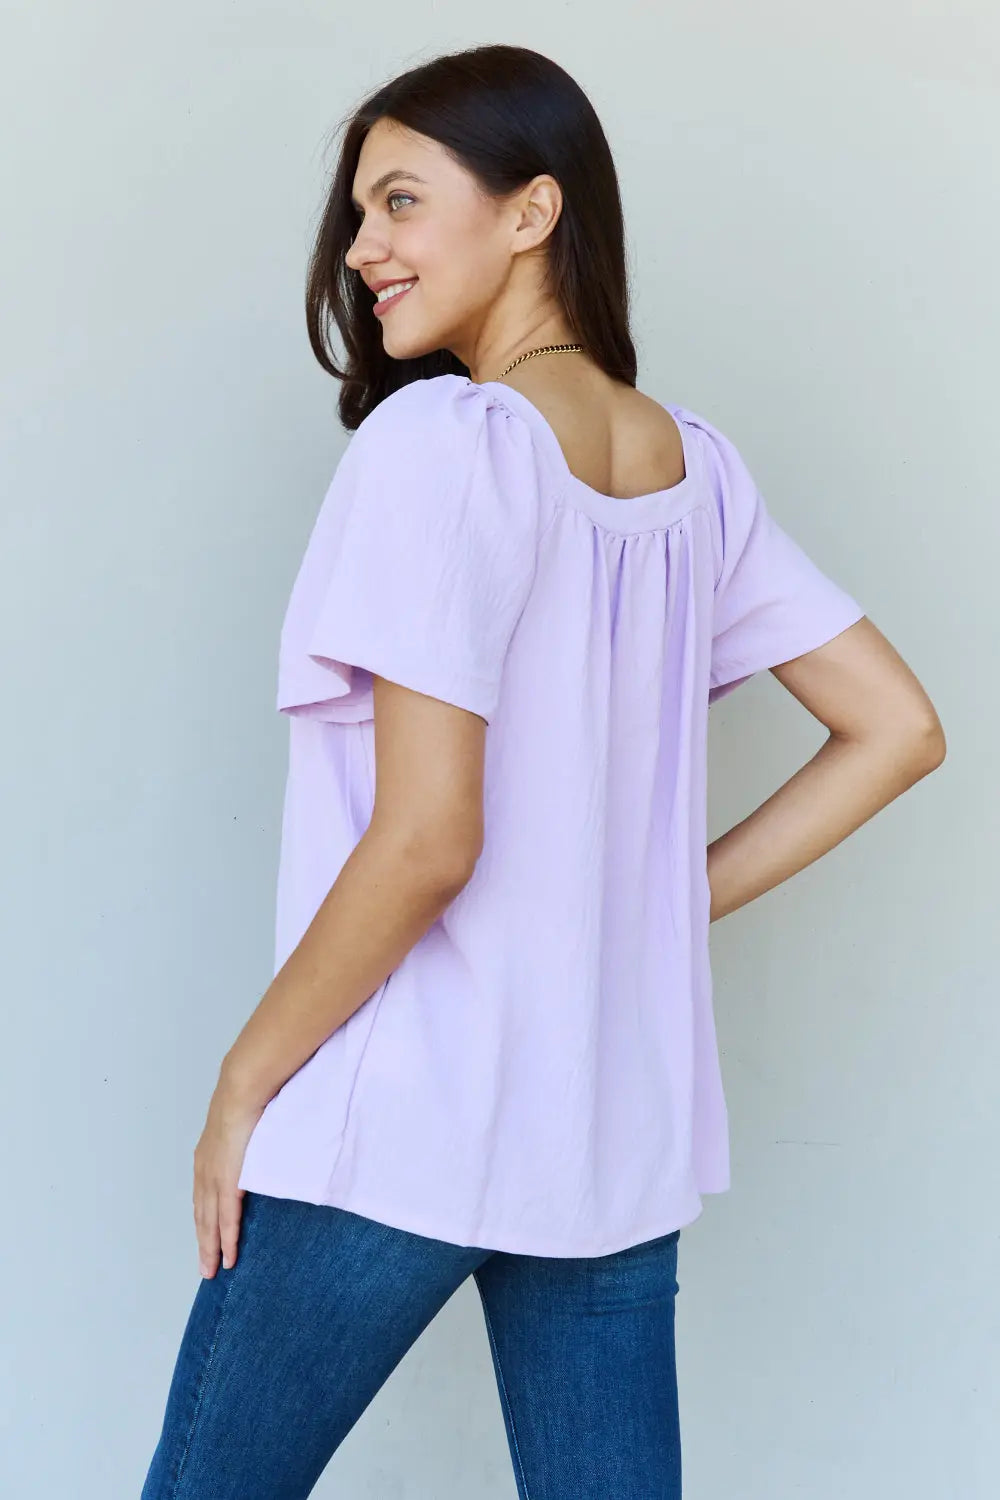 Ninexis Keep Me Close Square Neck Short Sleeve Blouse in Lavender - Hot Trends